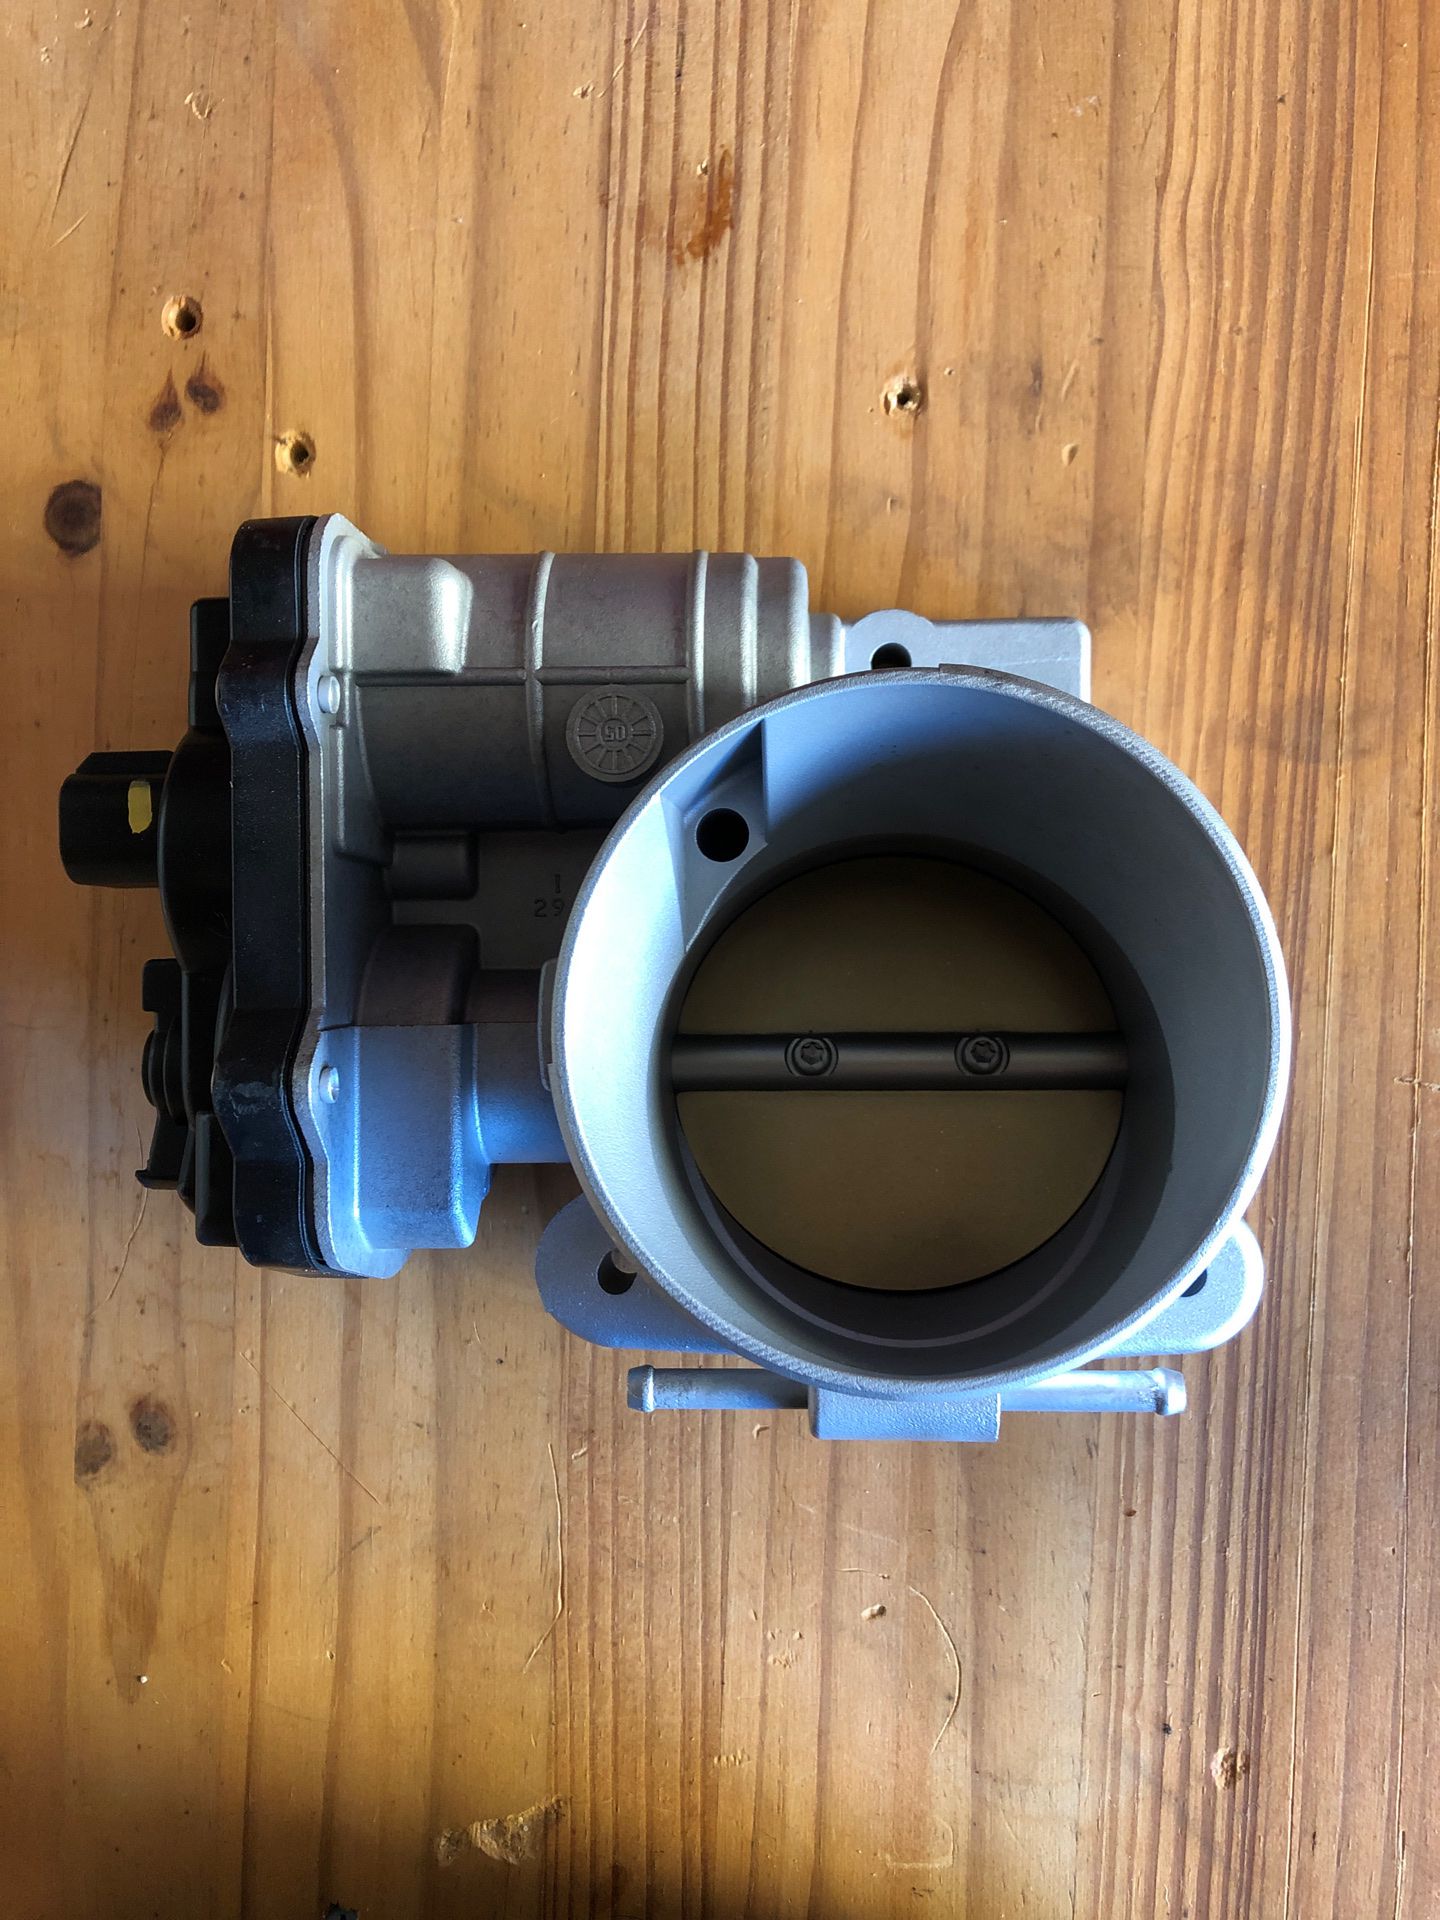 5Throttle Body Value for 2004 Chevy 1500 2500 Avalanche Tahoe 5.3L